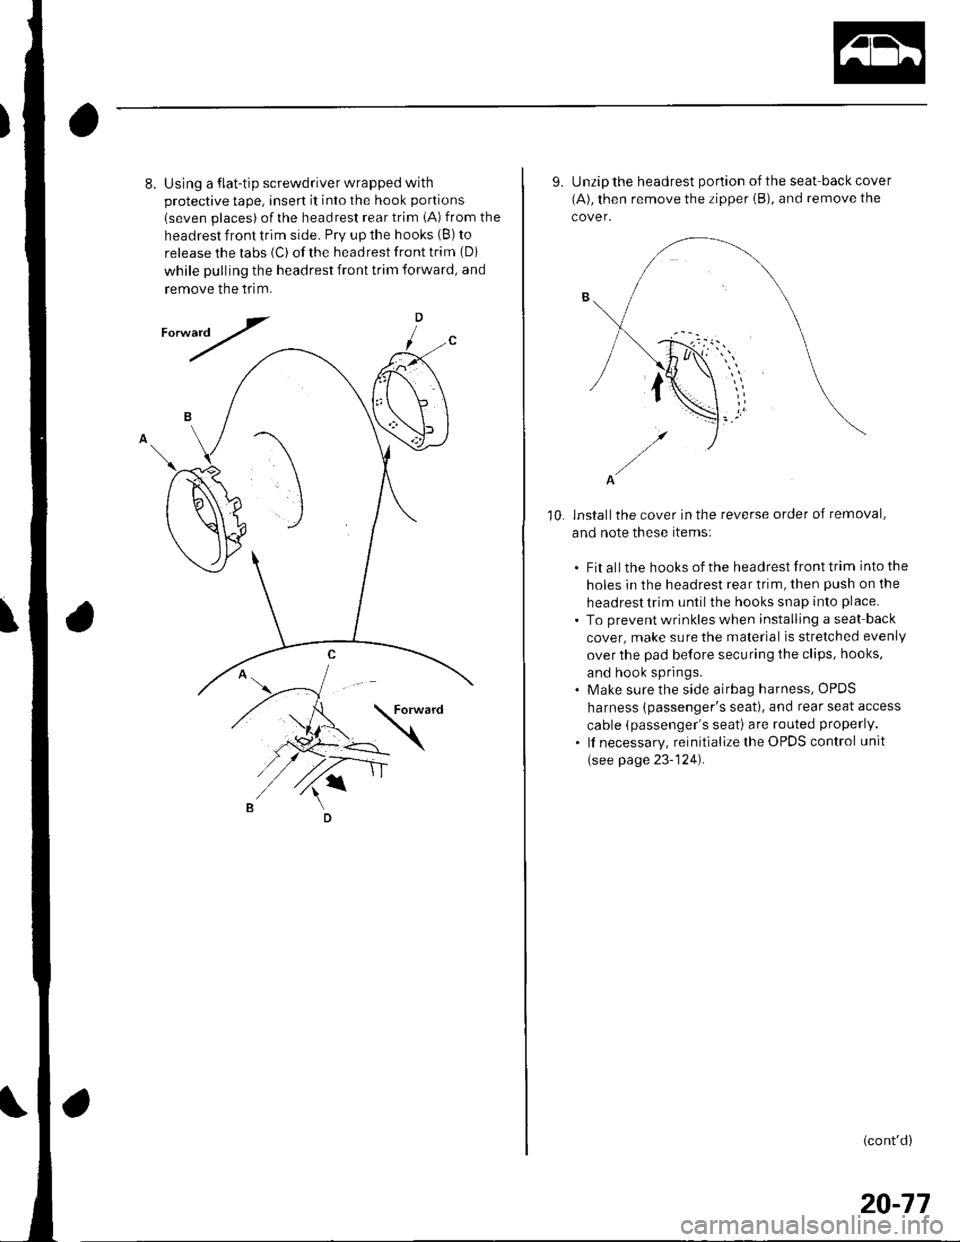 HONDA CIVIC 2003 7.G Workshop Manual 8.Using a flat-tip screwdriver wrapped with
protective tape, insert it into the hook portions
(seven places) ofthe headrest rear trim iA) from the
headrest front trim side. Prv up the hooks (B) to
rel